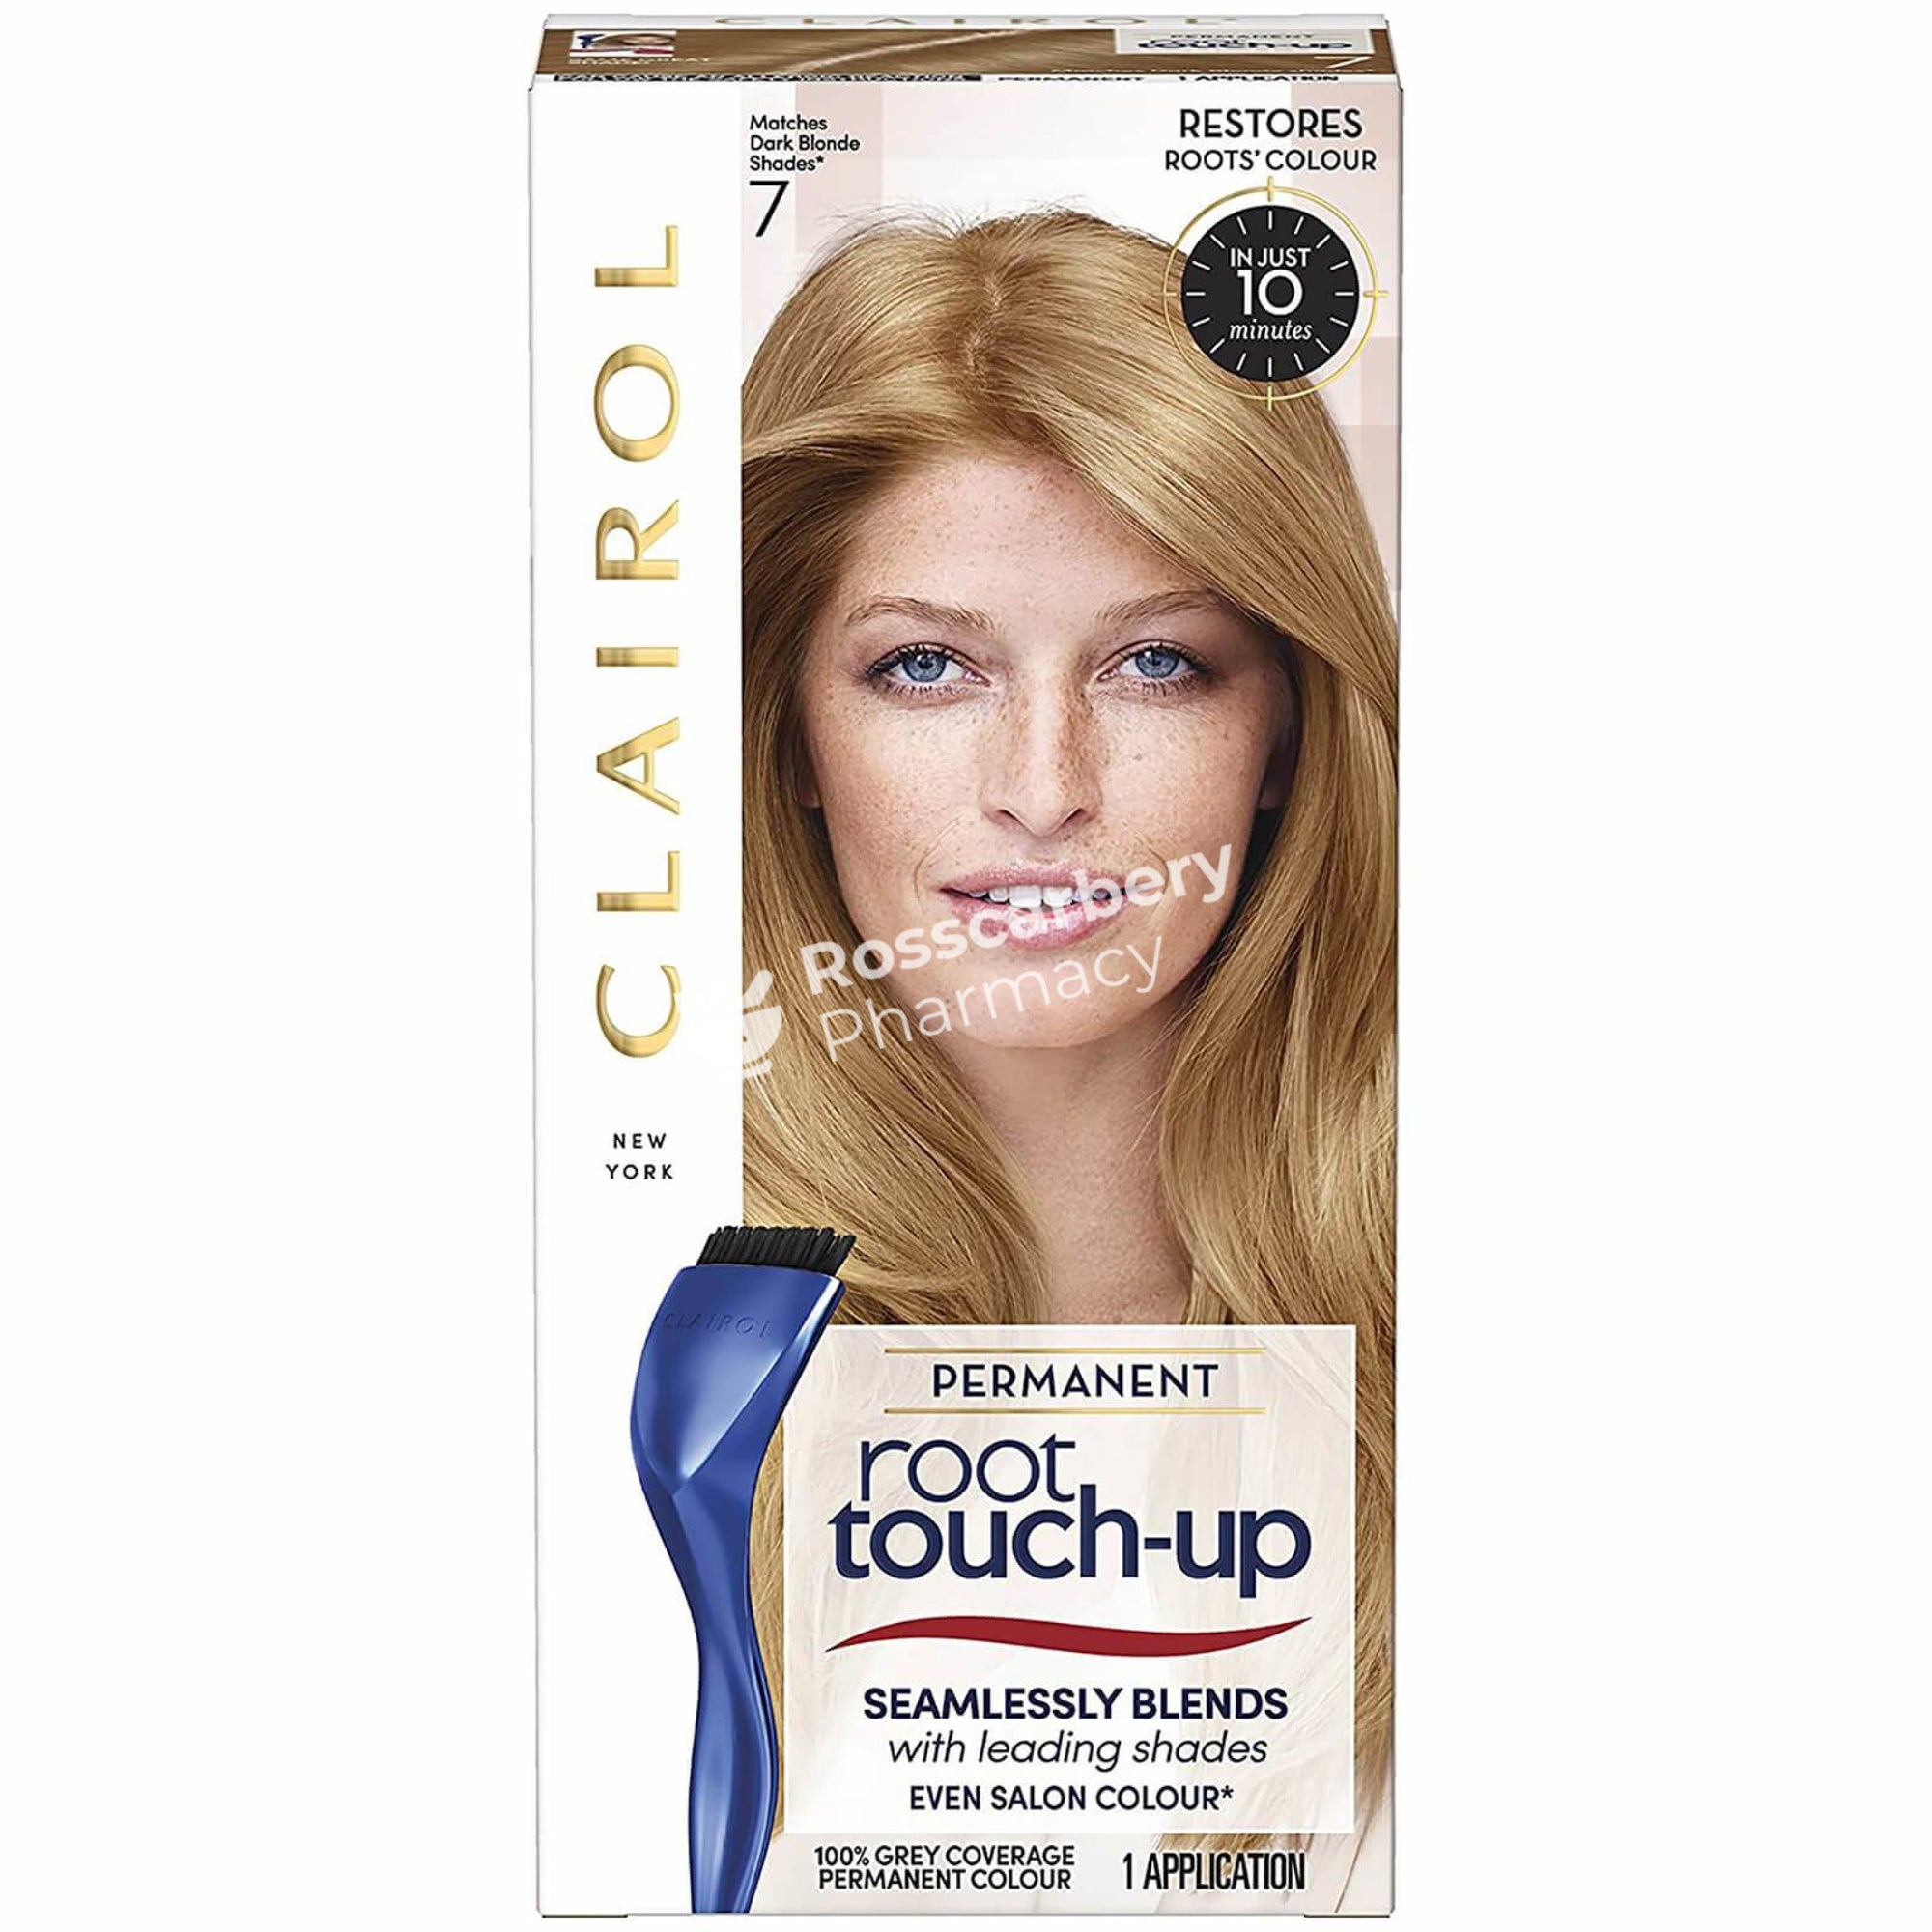 Clairol - Root Touch-Up No.7 Matches Dark Blonde Shades Hair Colouring